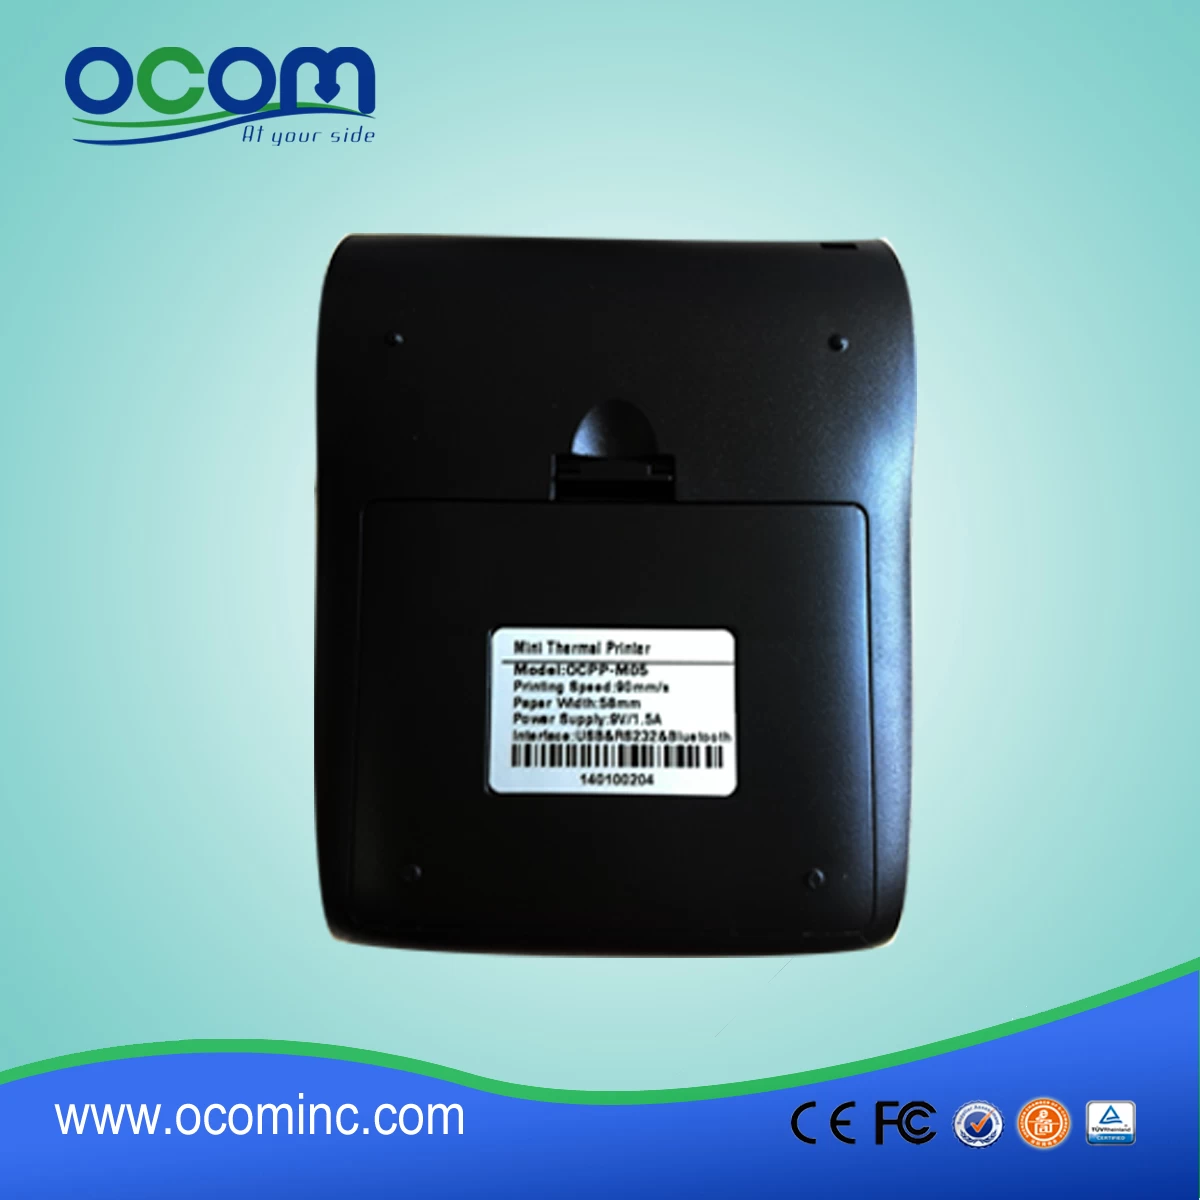 58mm Android Thermal printer with bluetooth--OCPP-M05